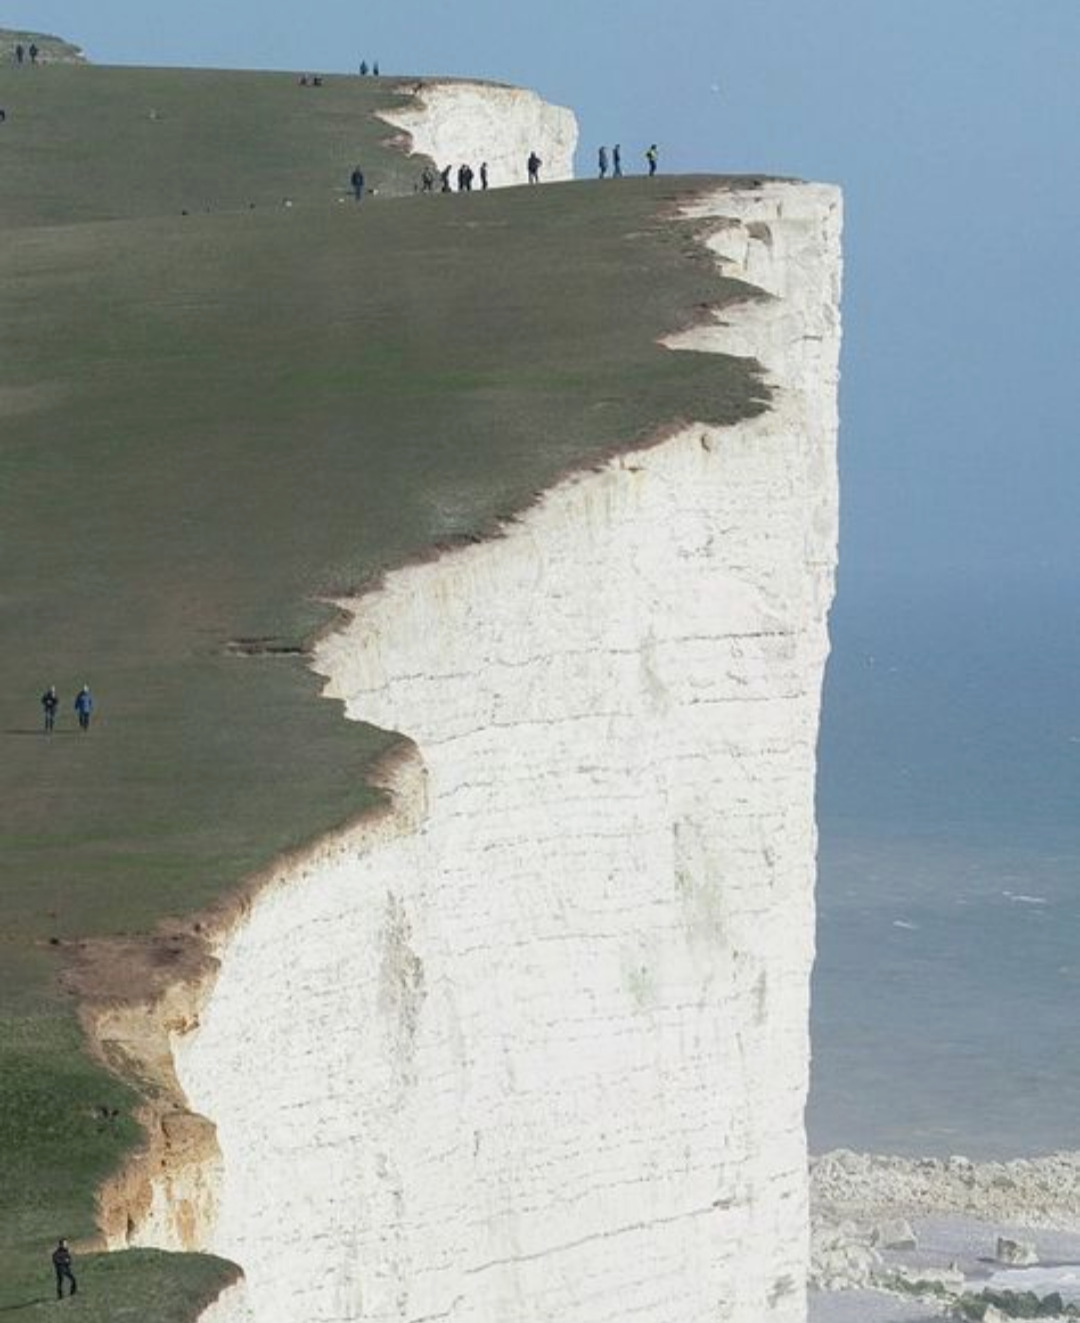 The True Terrifying Scale Of The White Cliffs Of Dover, UK